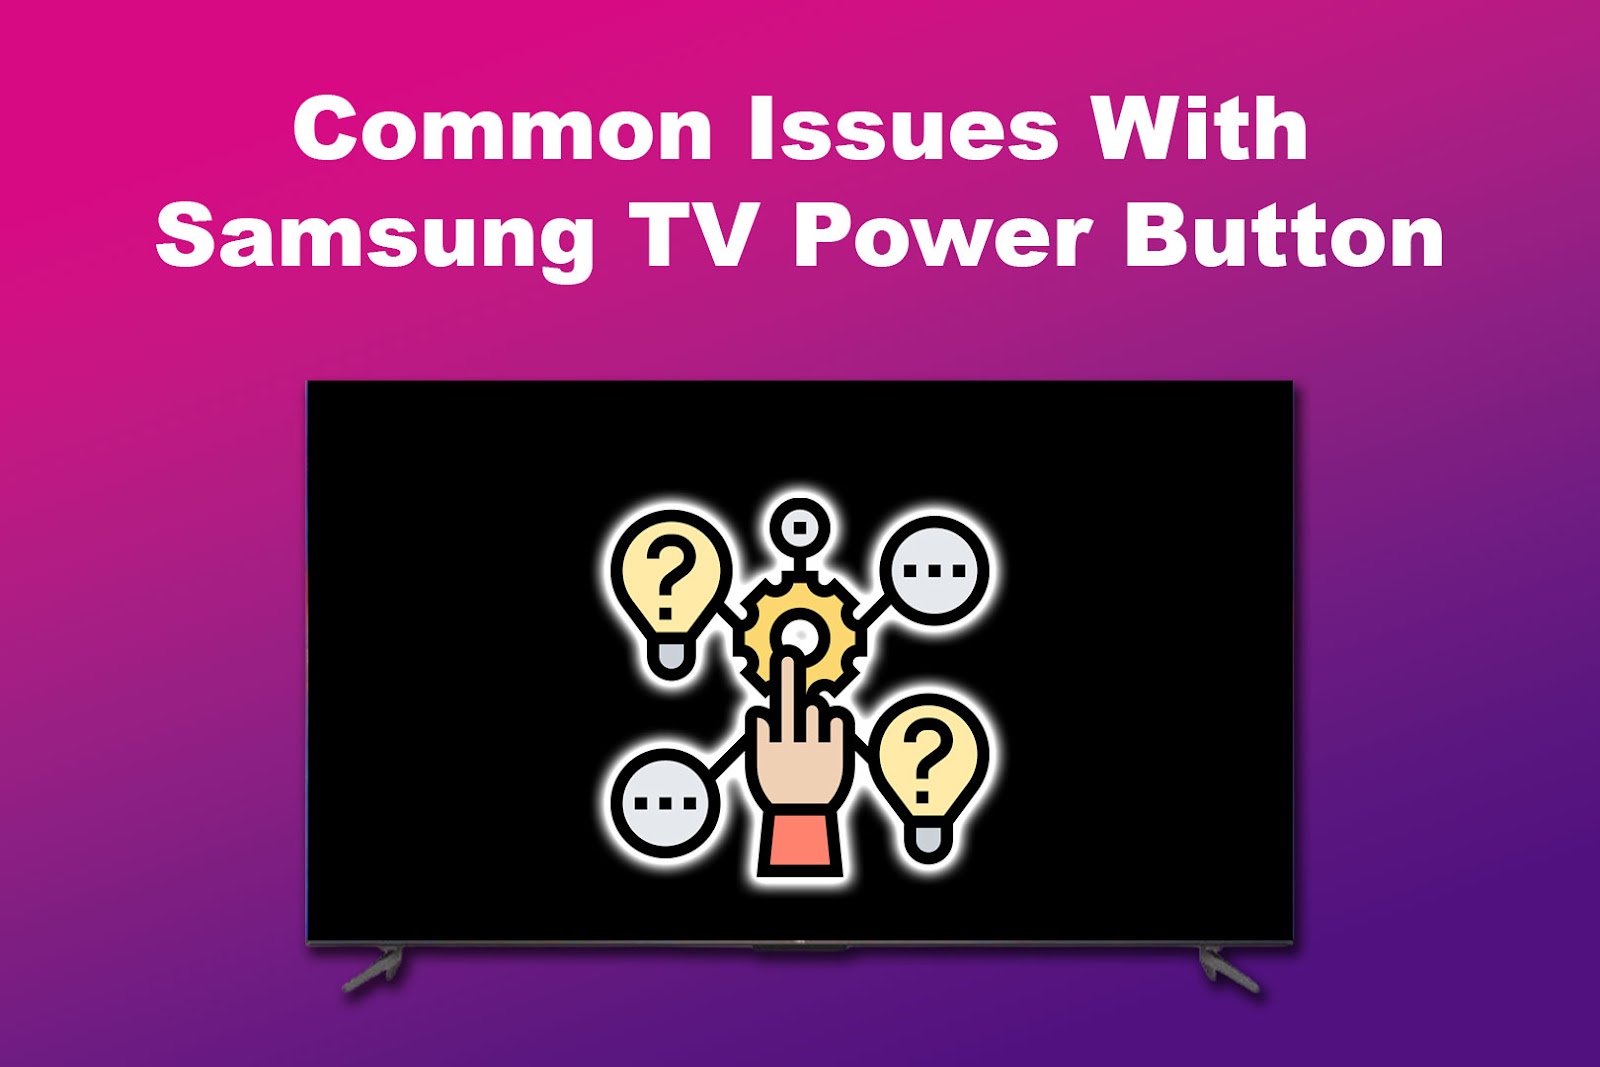 Common Issues With Samsung TV Power Button